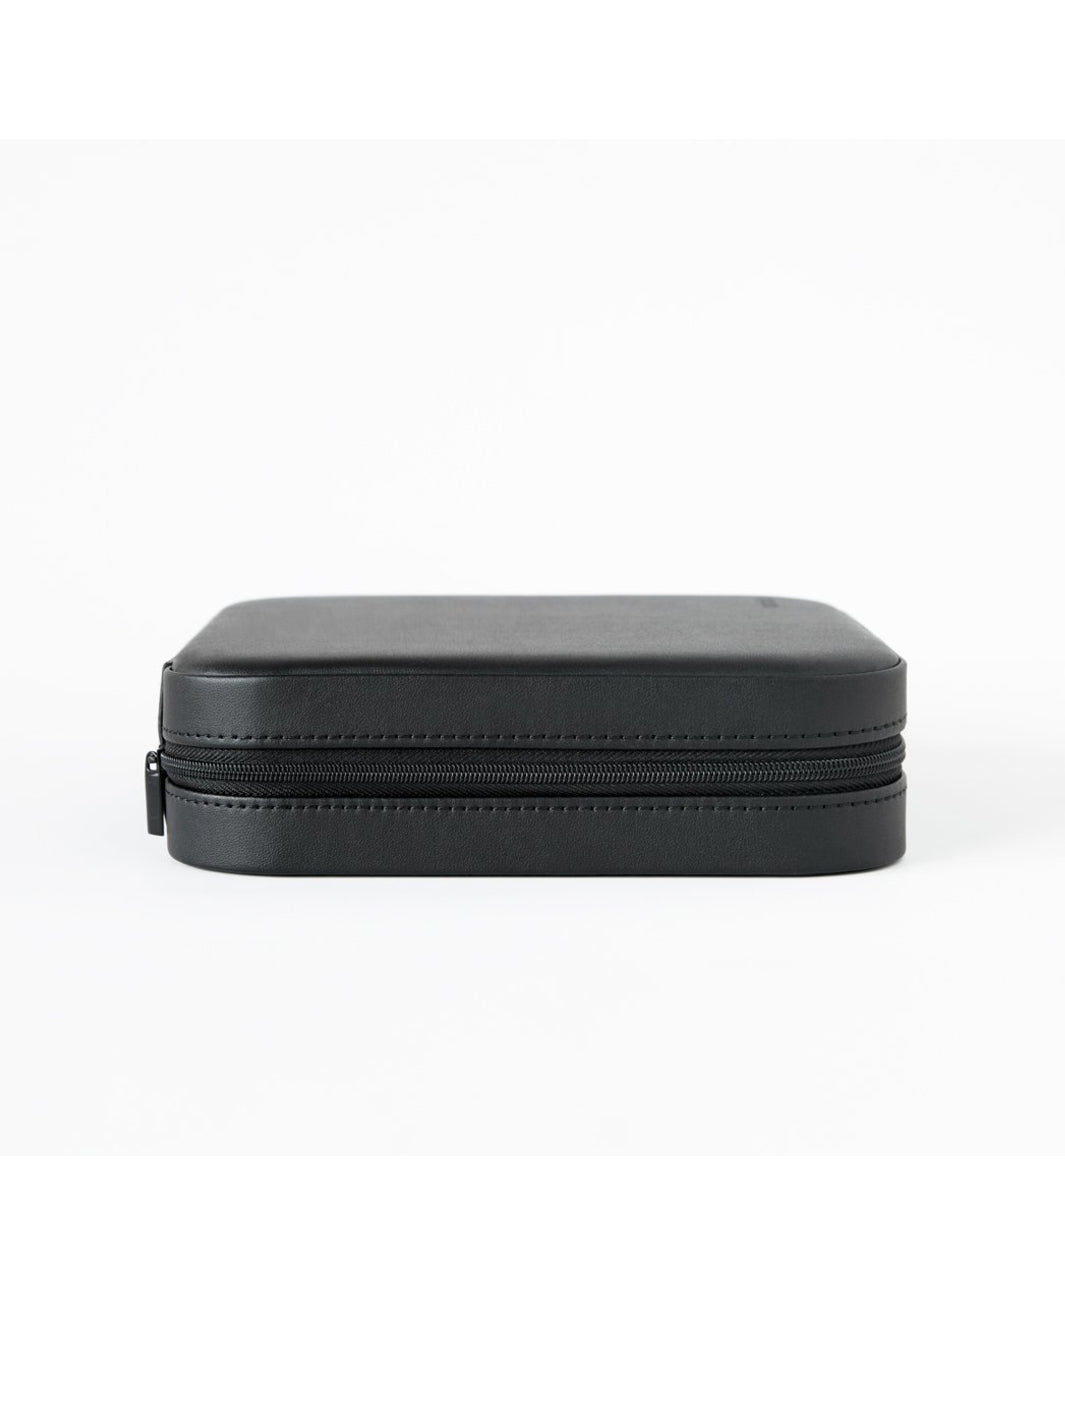 ACAIA Pearl Carrying Case